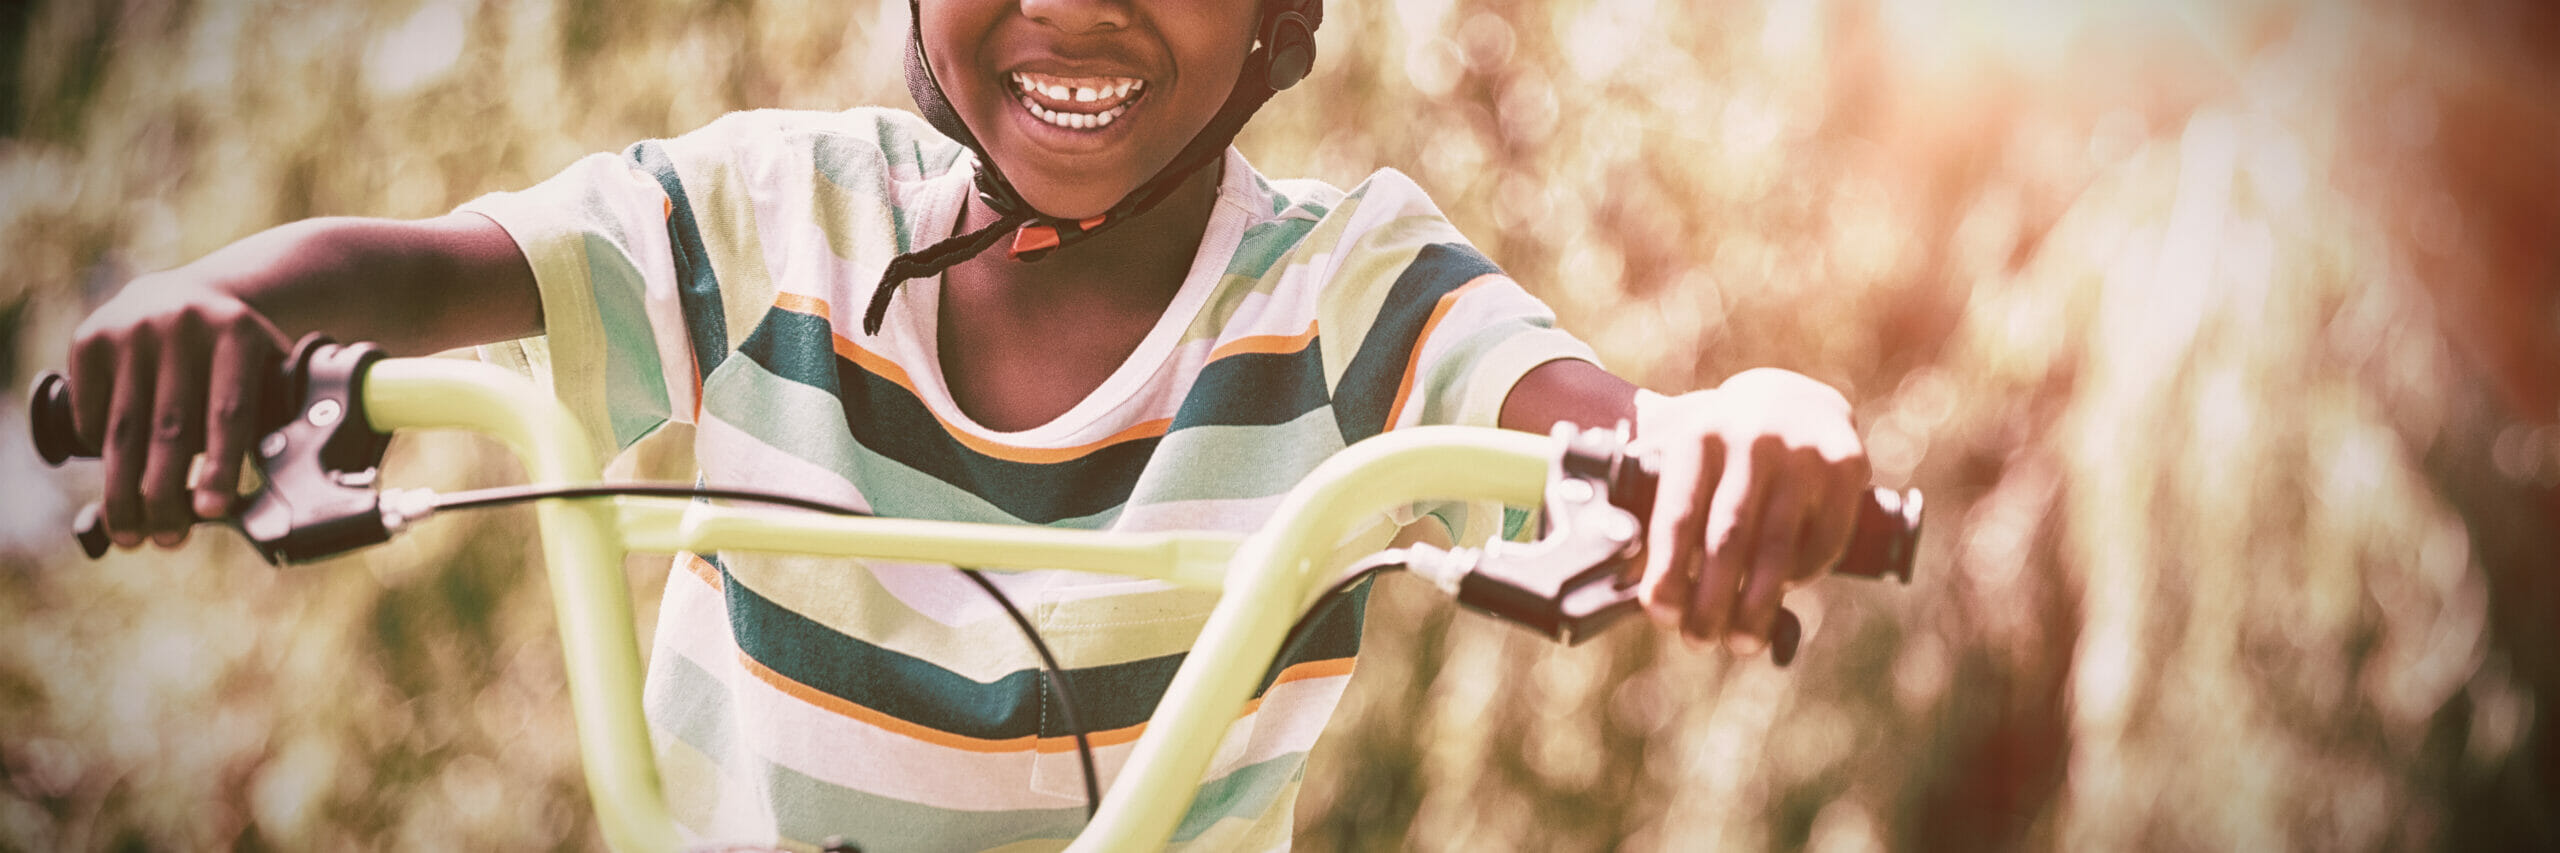 A little boy smiling, wearing a bicycle helmet, riding a bicycle